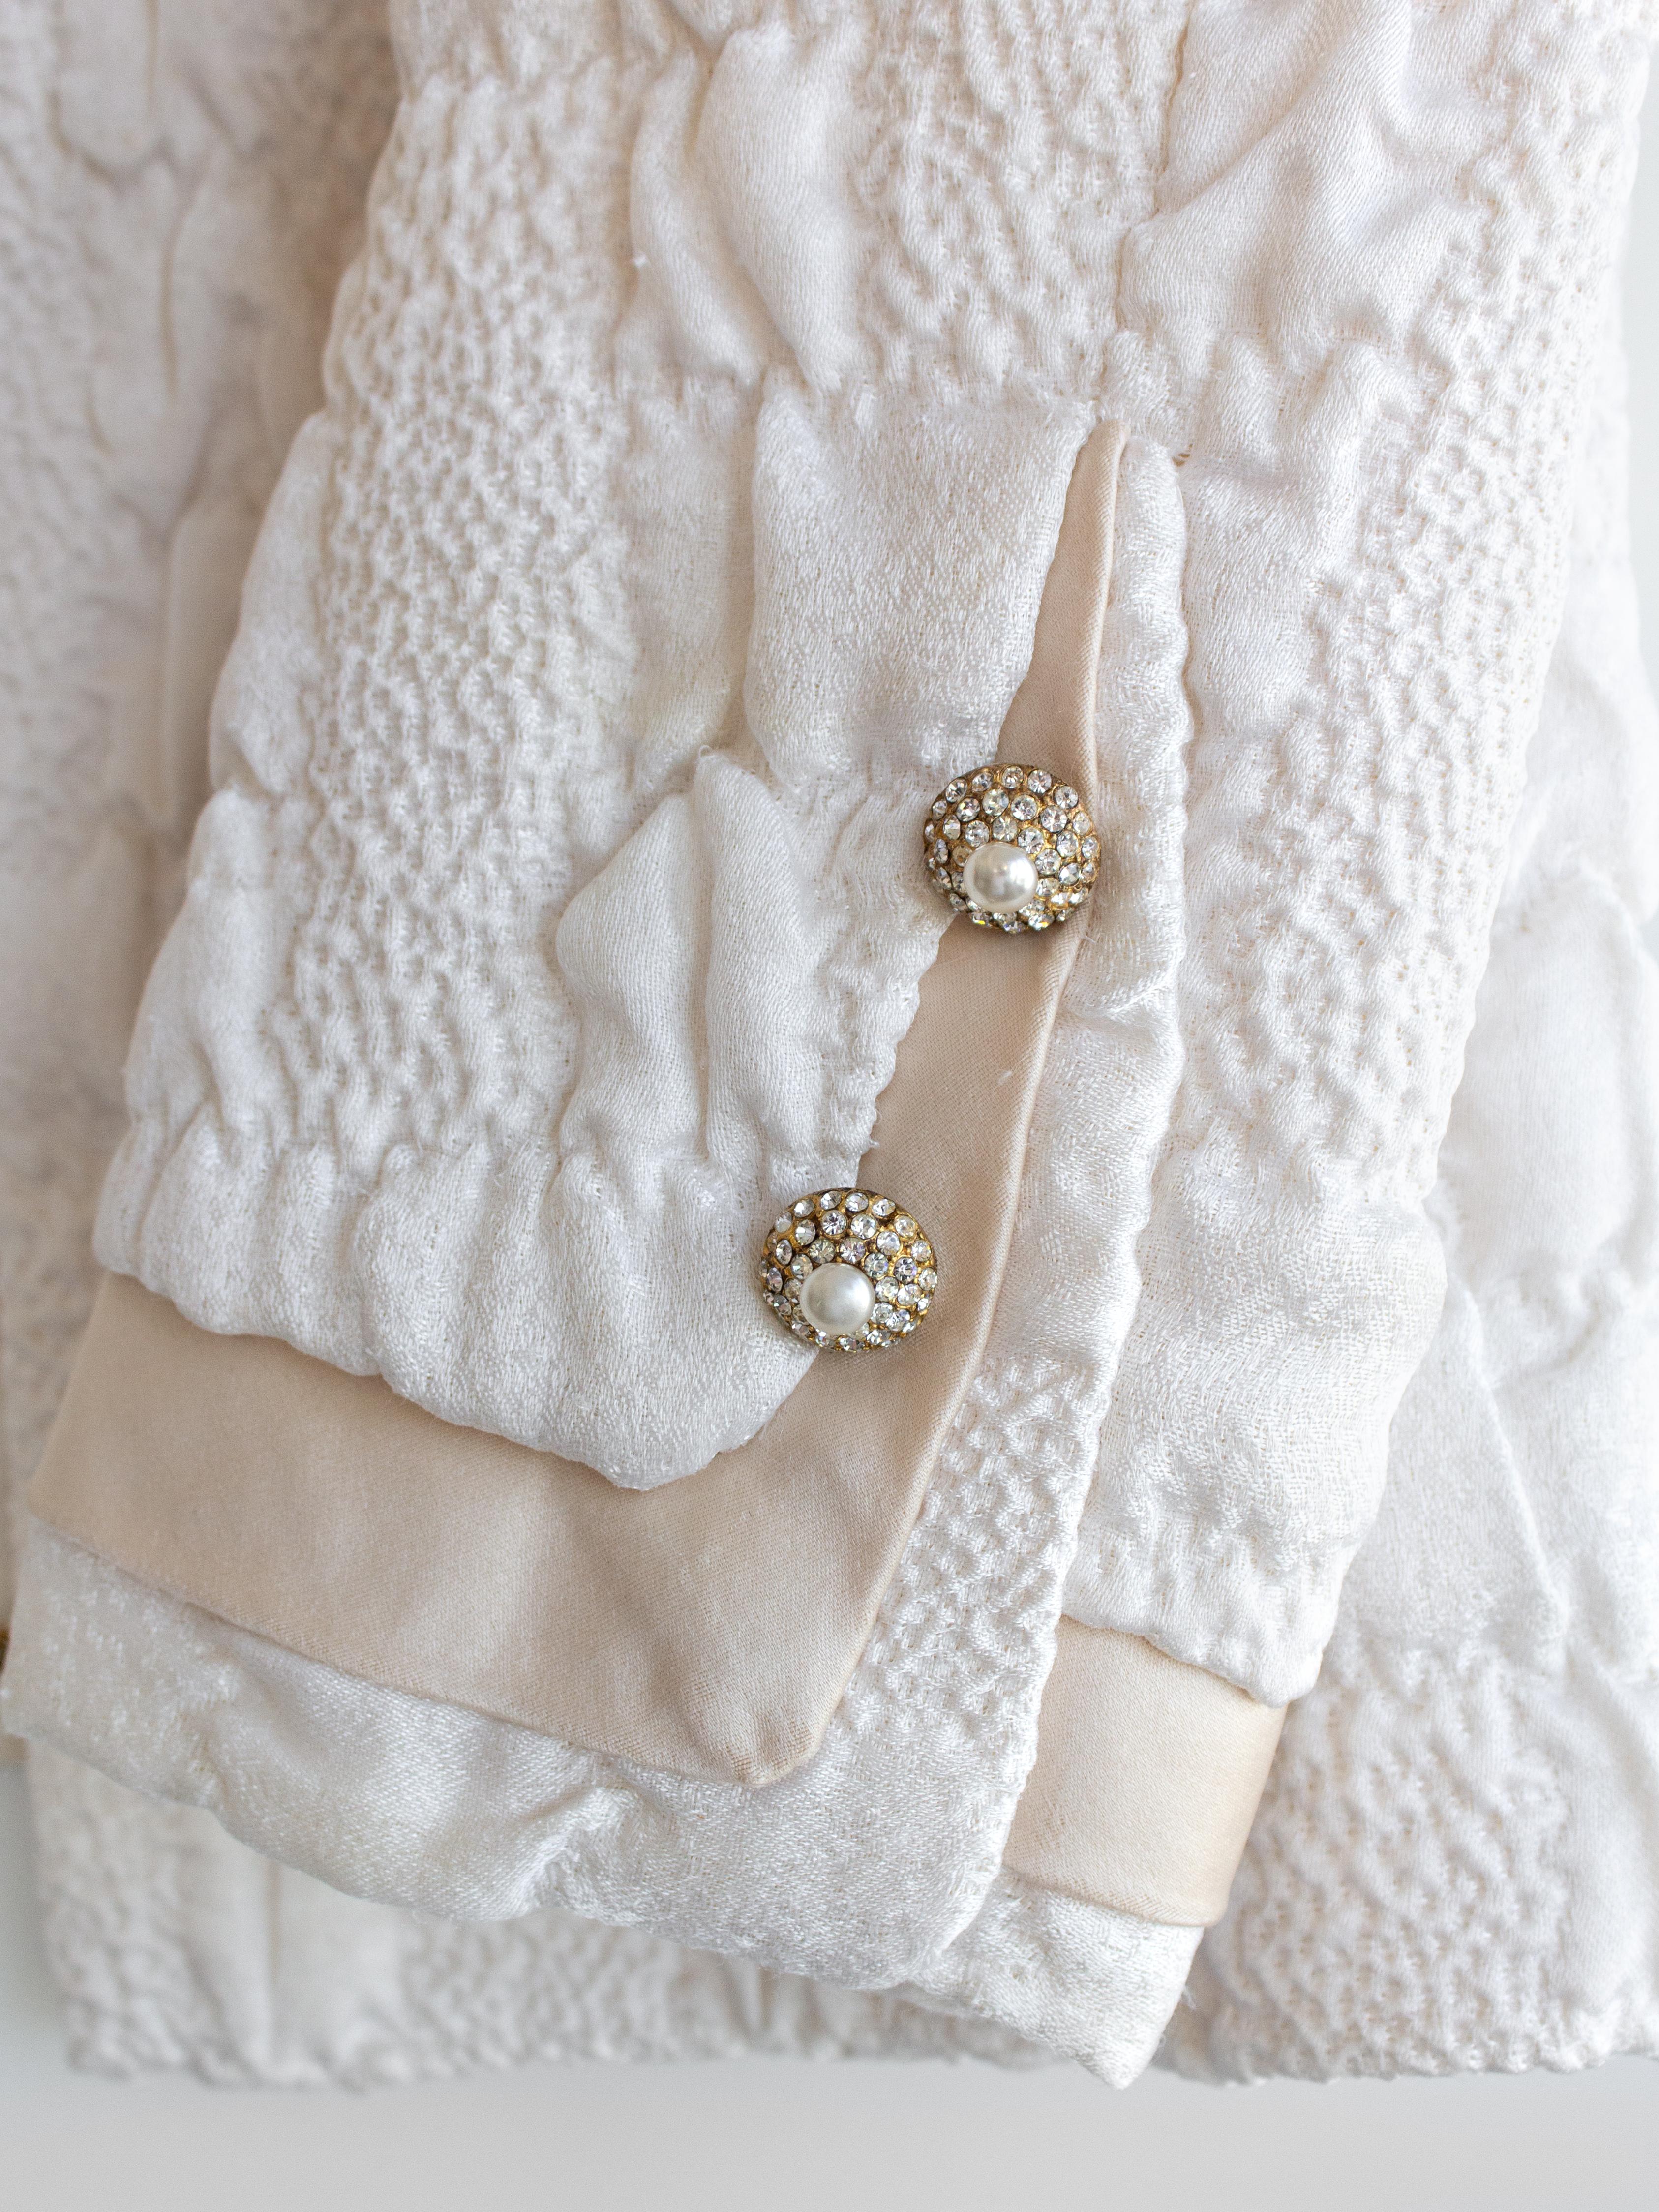 Documented Chanel Vintage Haute Couture 1965 White Cream Textured Silk Jacket For Sale 8